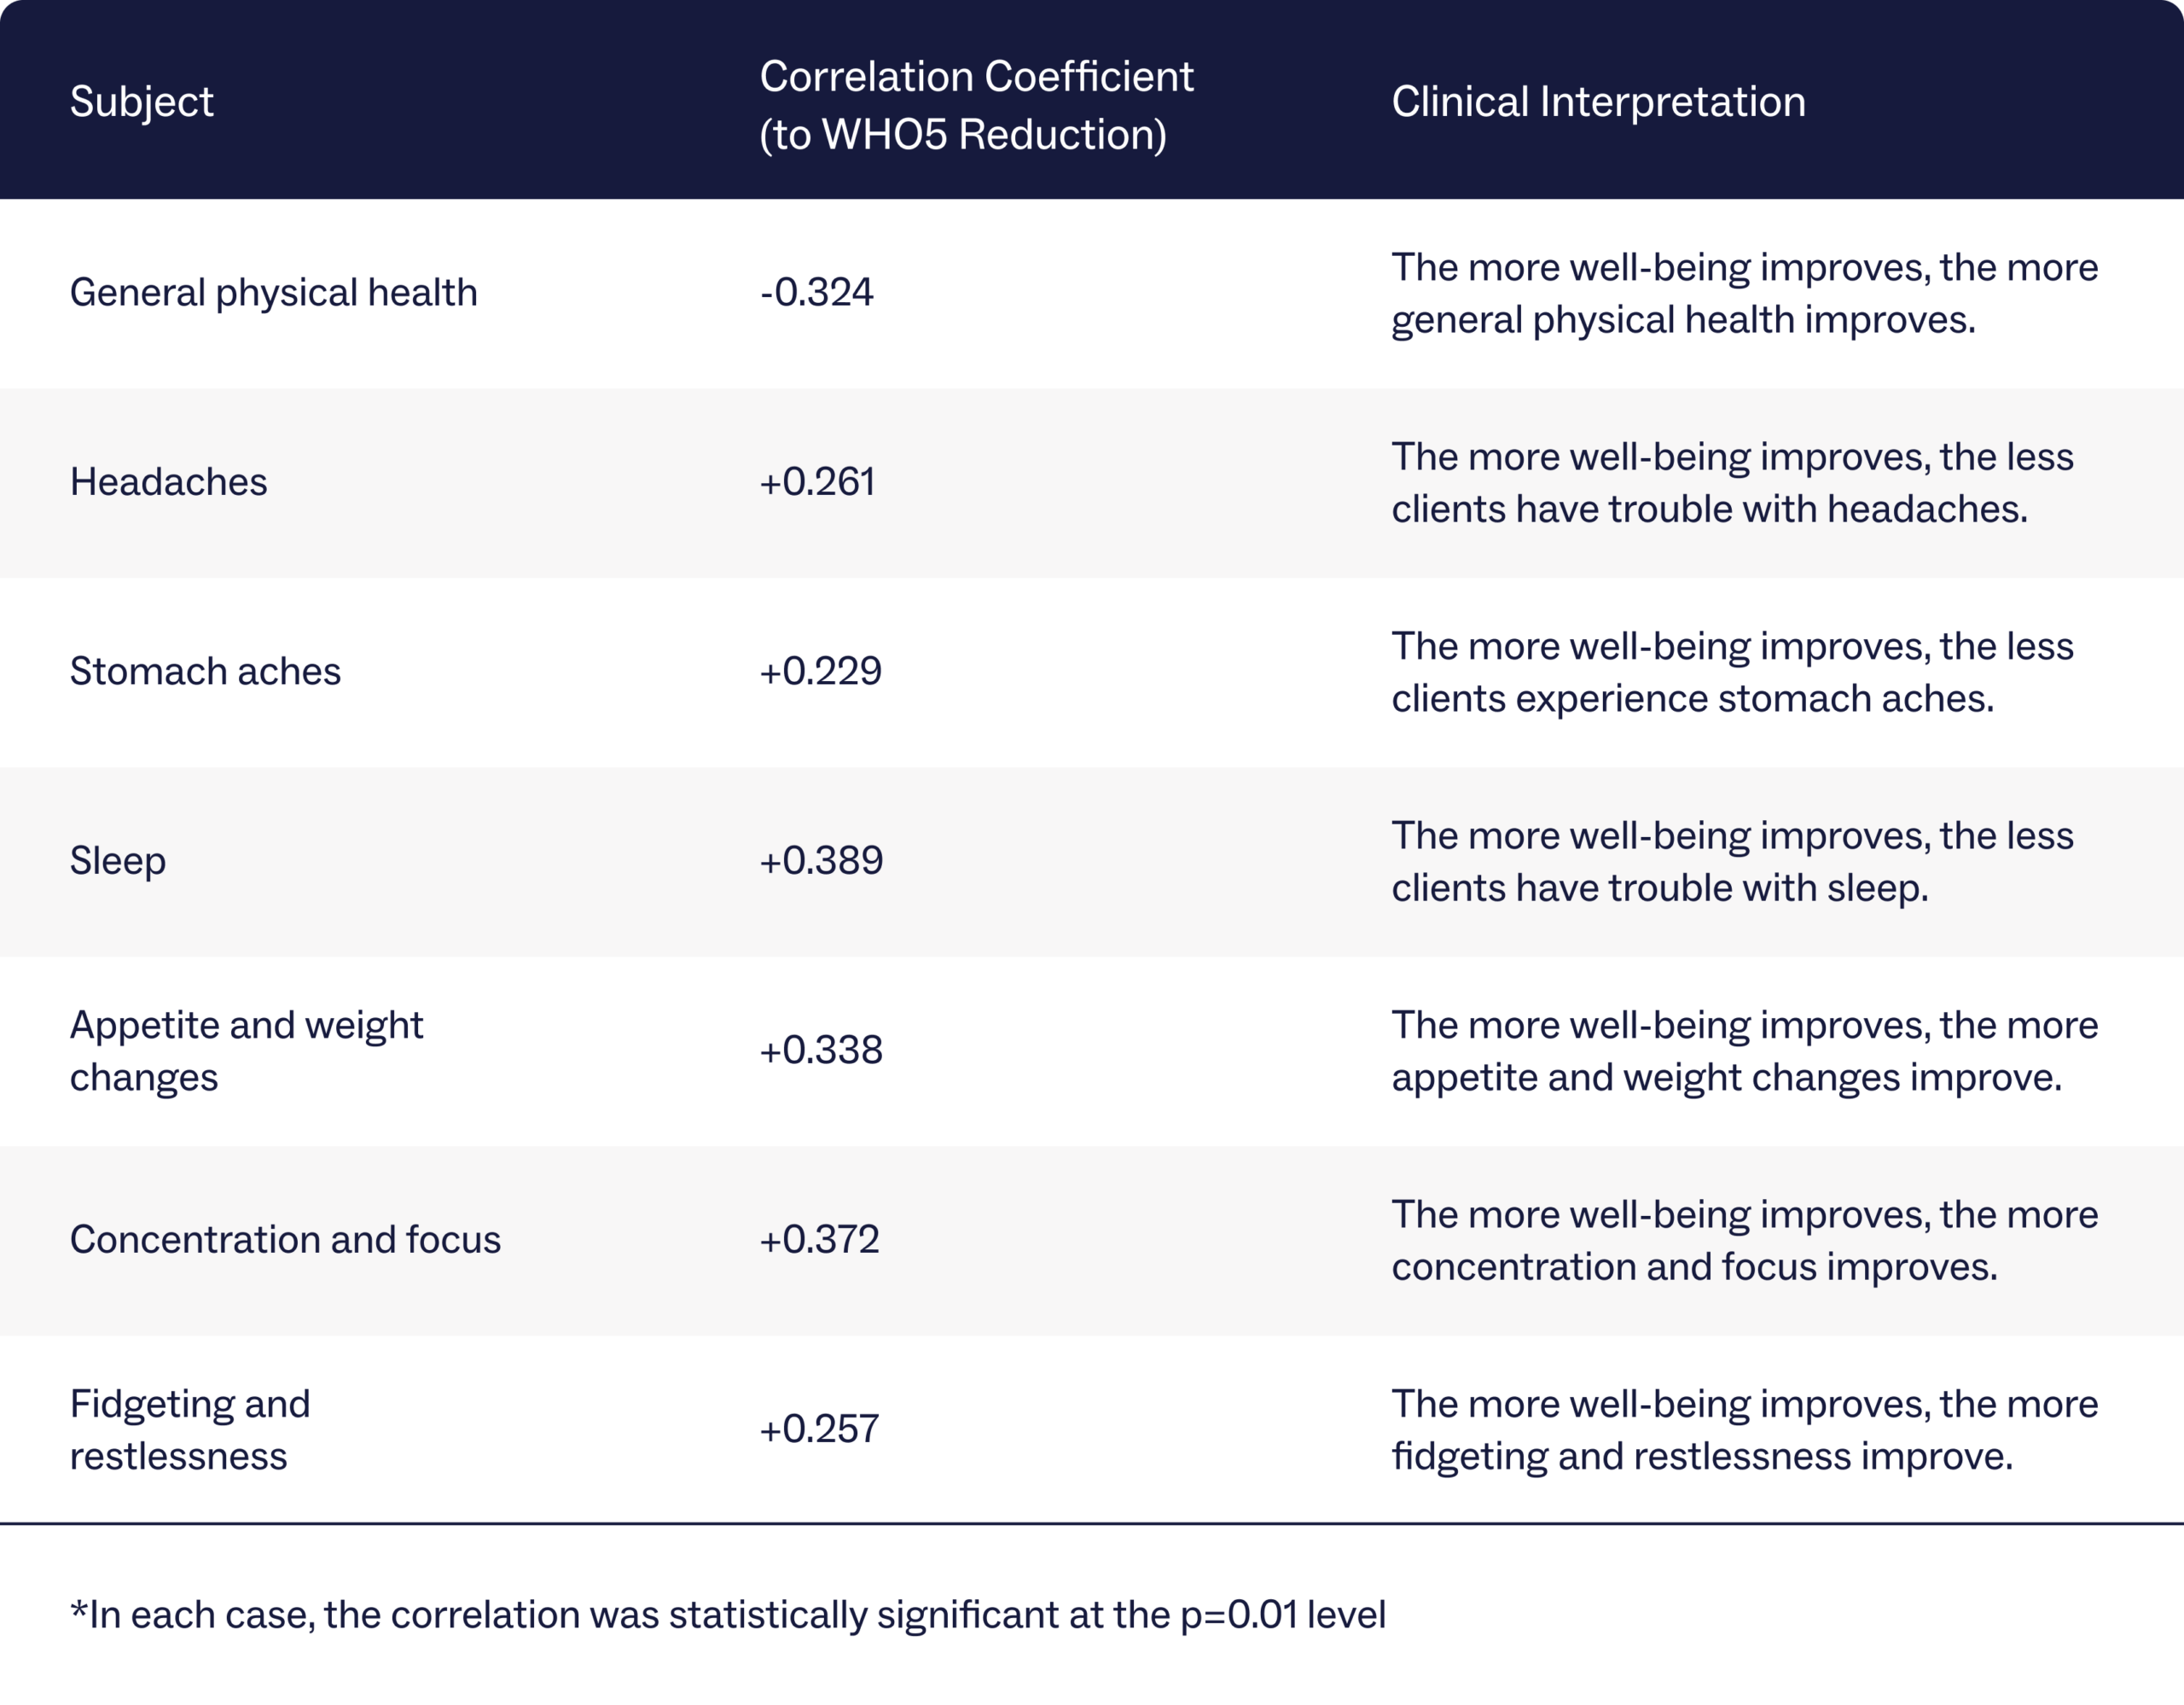 Table showing the relationship between well-being and physical health